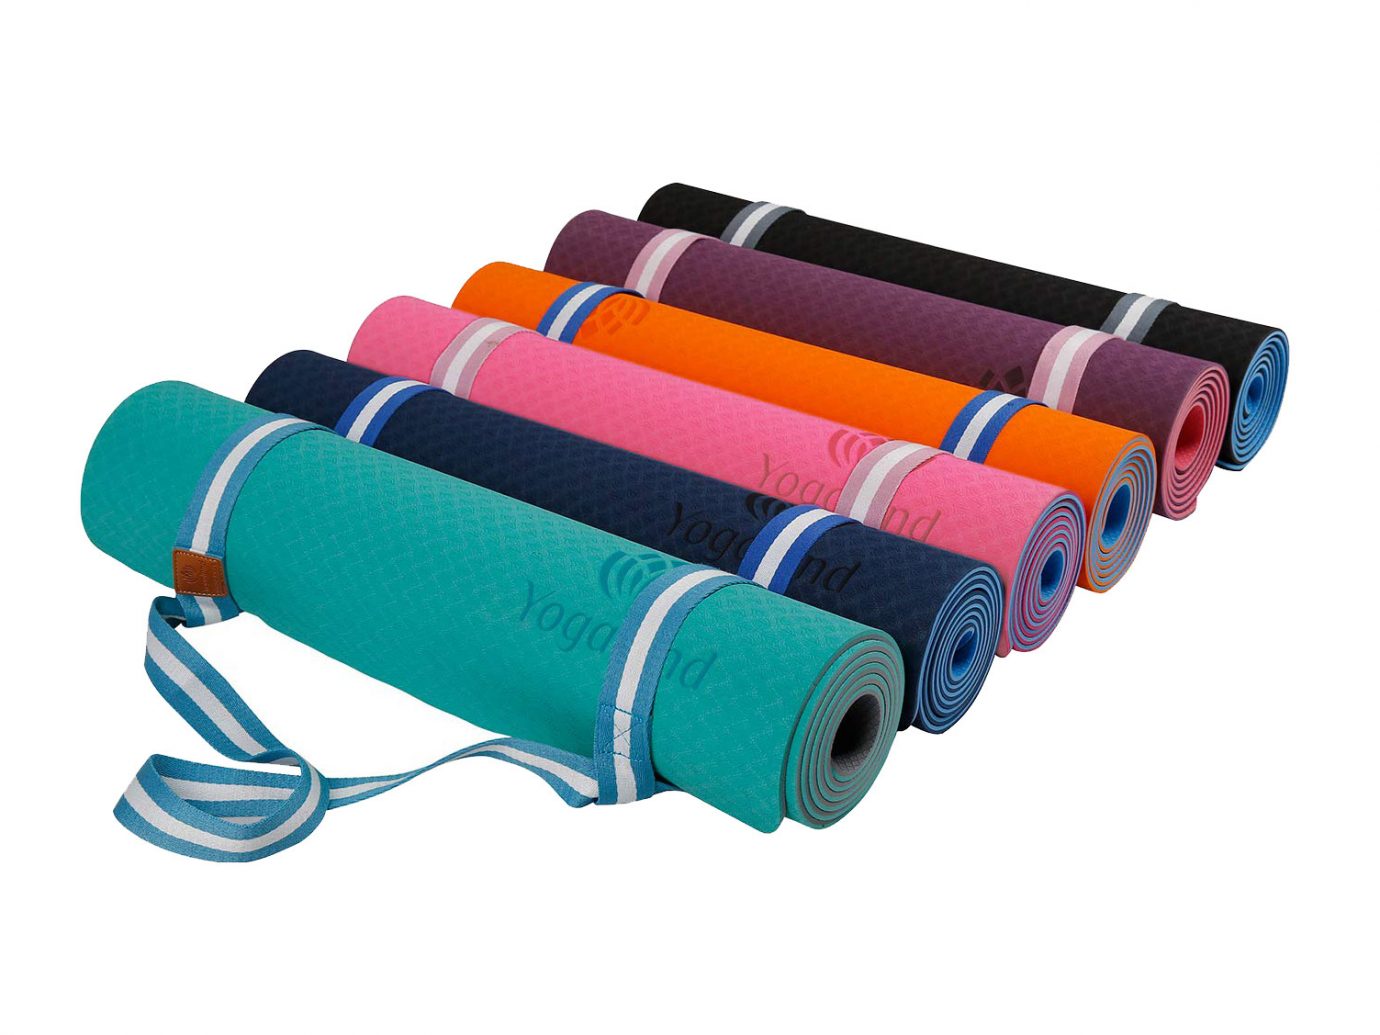 Buy YOGALAND Premium Yoga Mat with Carrier Strap on Amazon